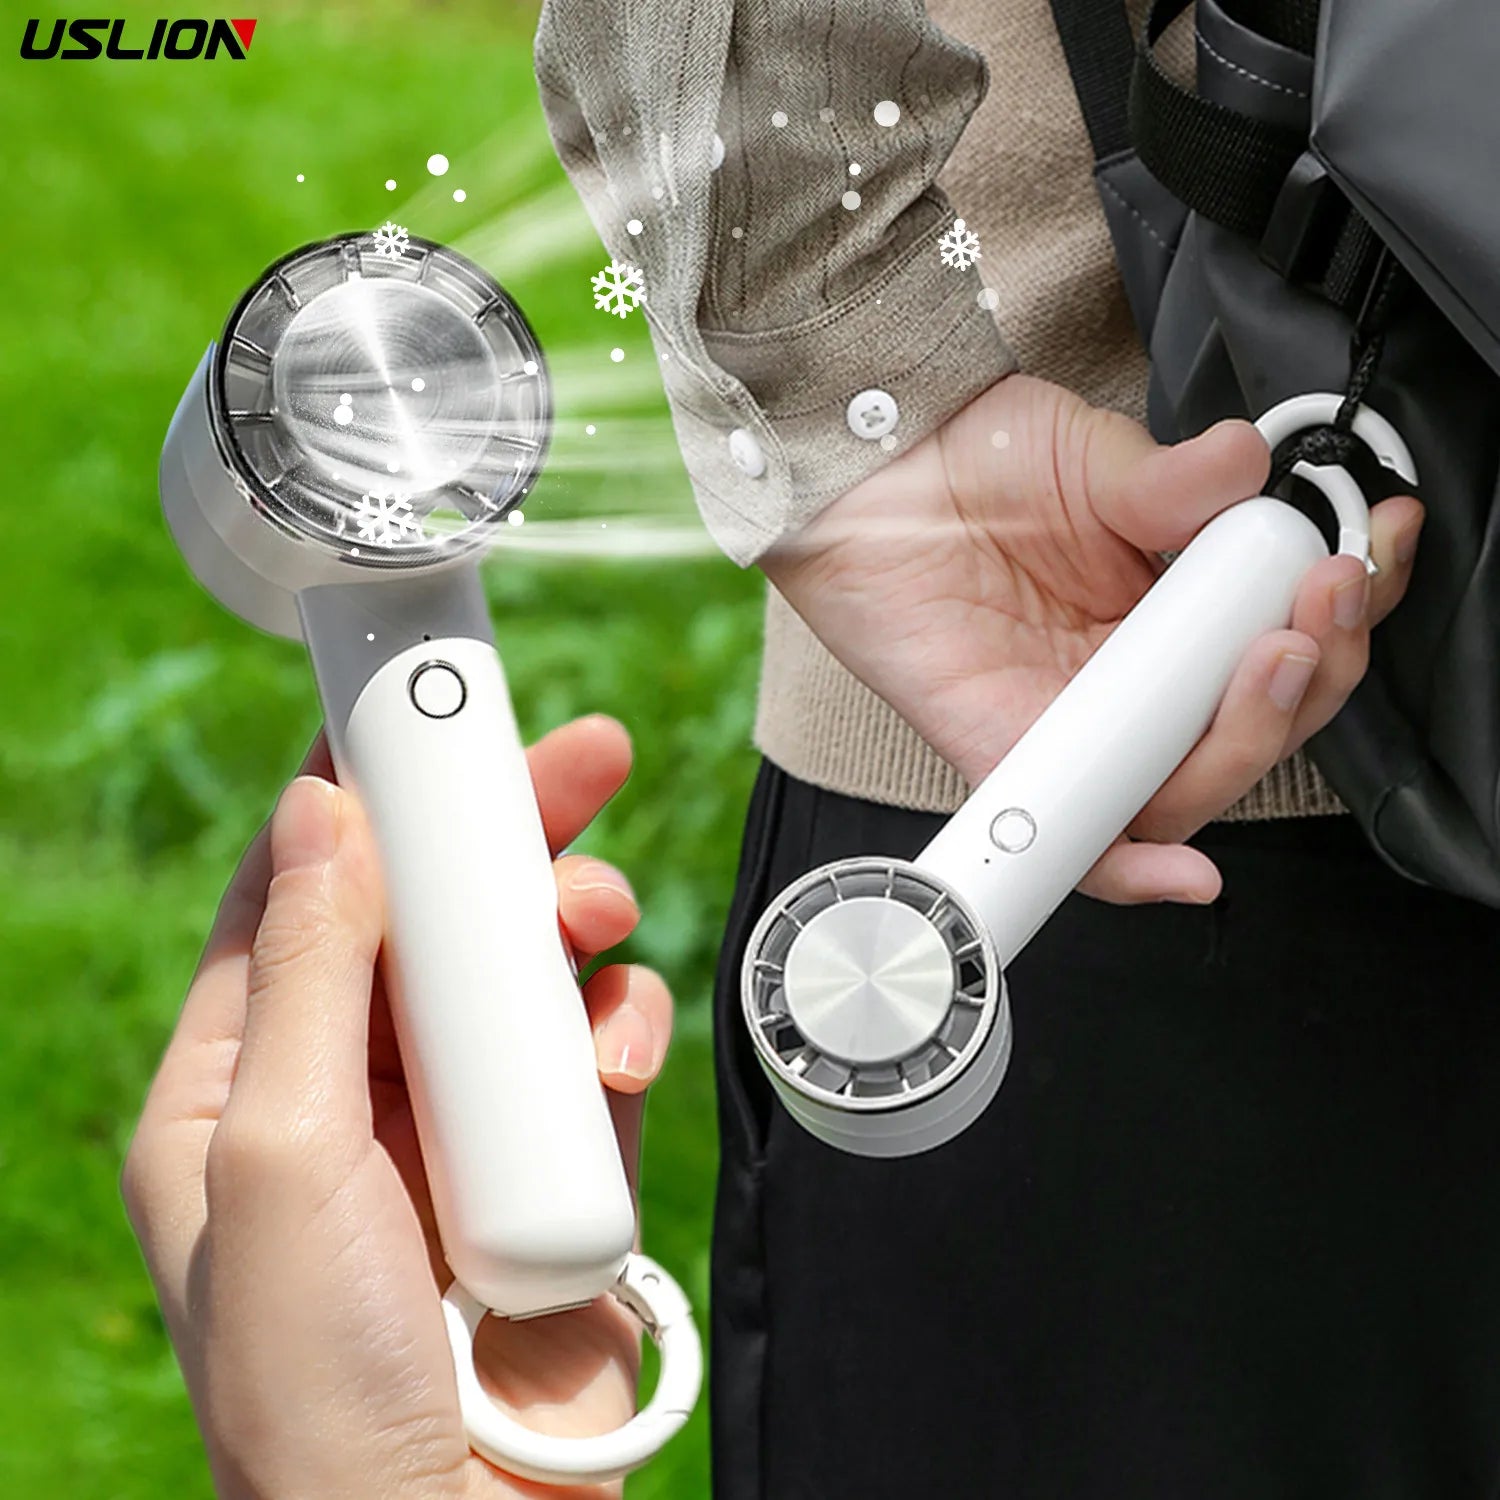 USLION Portable Electric Fan Semiconductor Refrigeration Handheld Fan 2000mAh USB Rechargeable Cooling Fan Air Cooler Outdoor